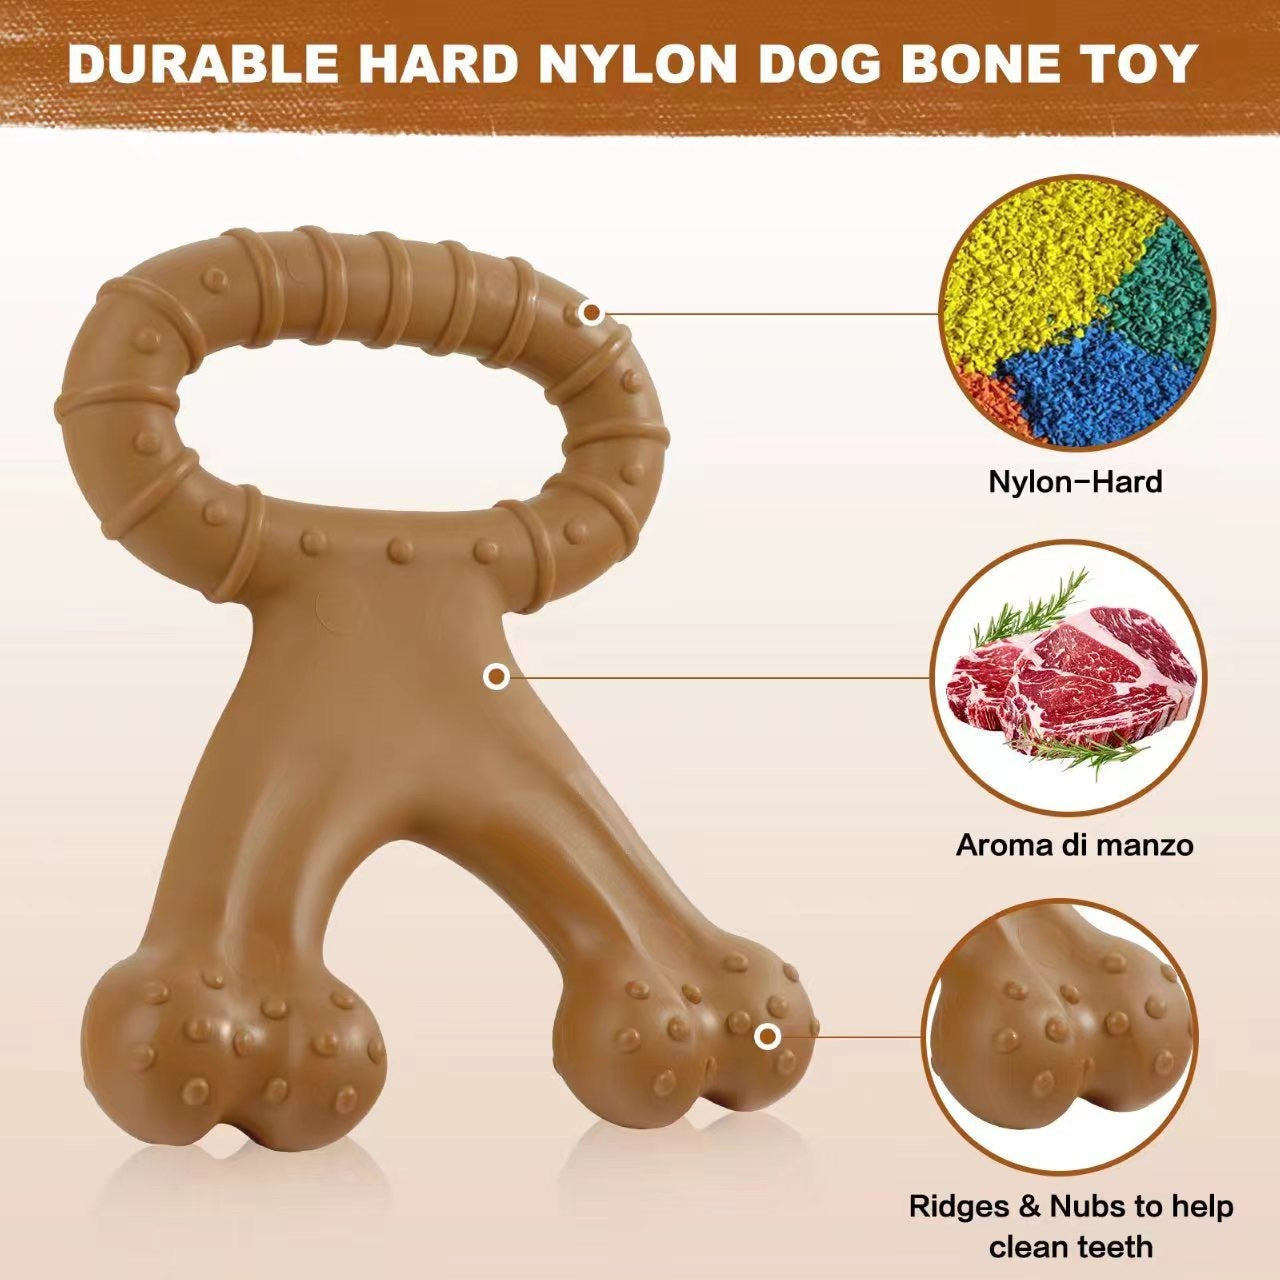 price 3.15usd weight 240g Dog Molar Pulling Toy Beef Flavor